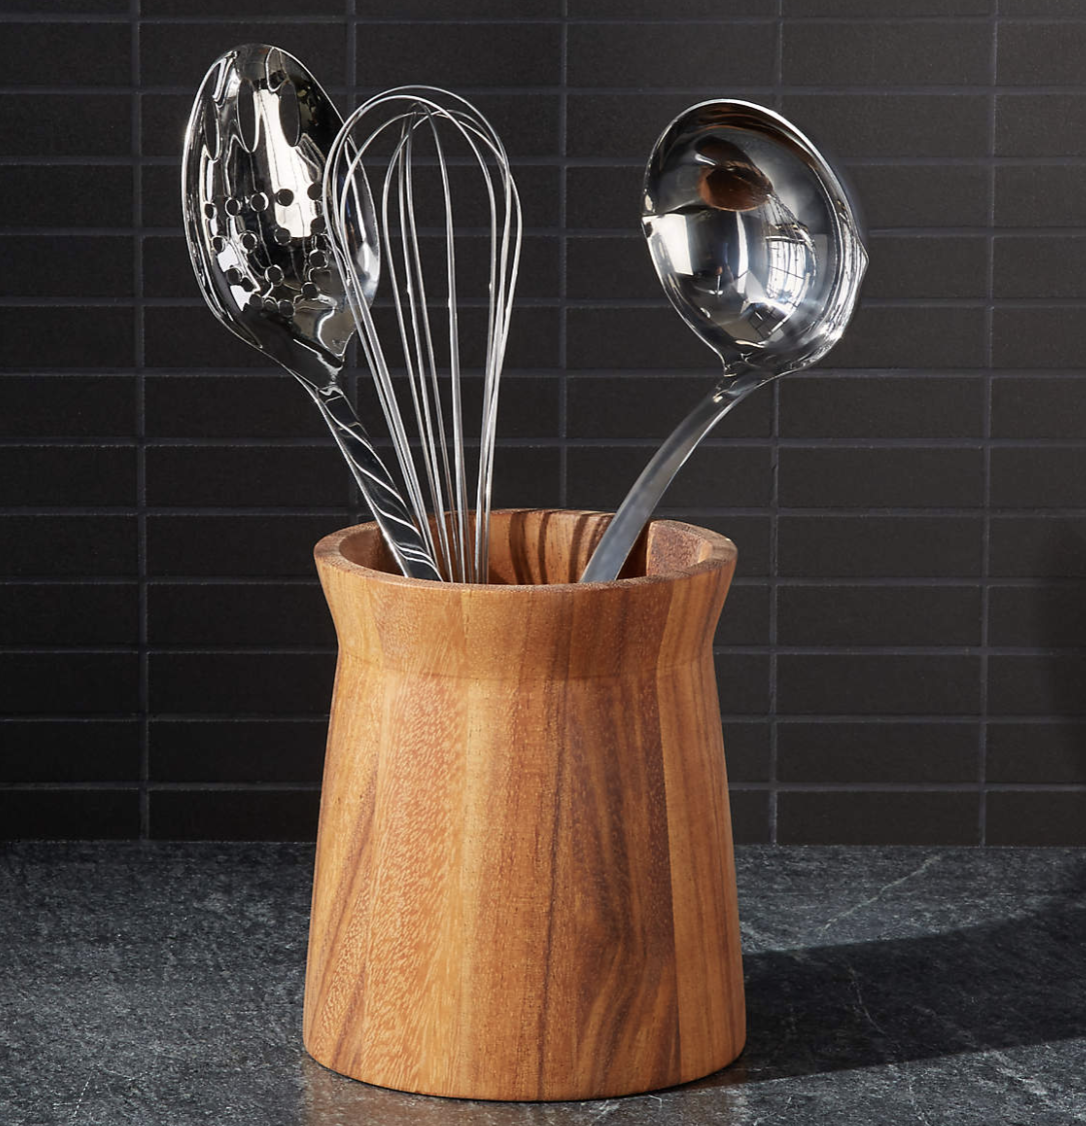 Five Two Ultimate Kitchen Utensils with Acacia Wood Handles on Food52